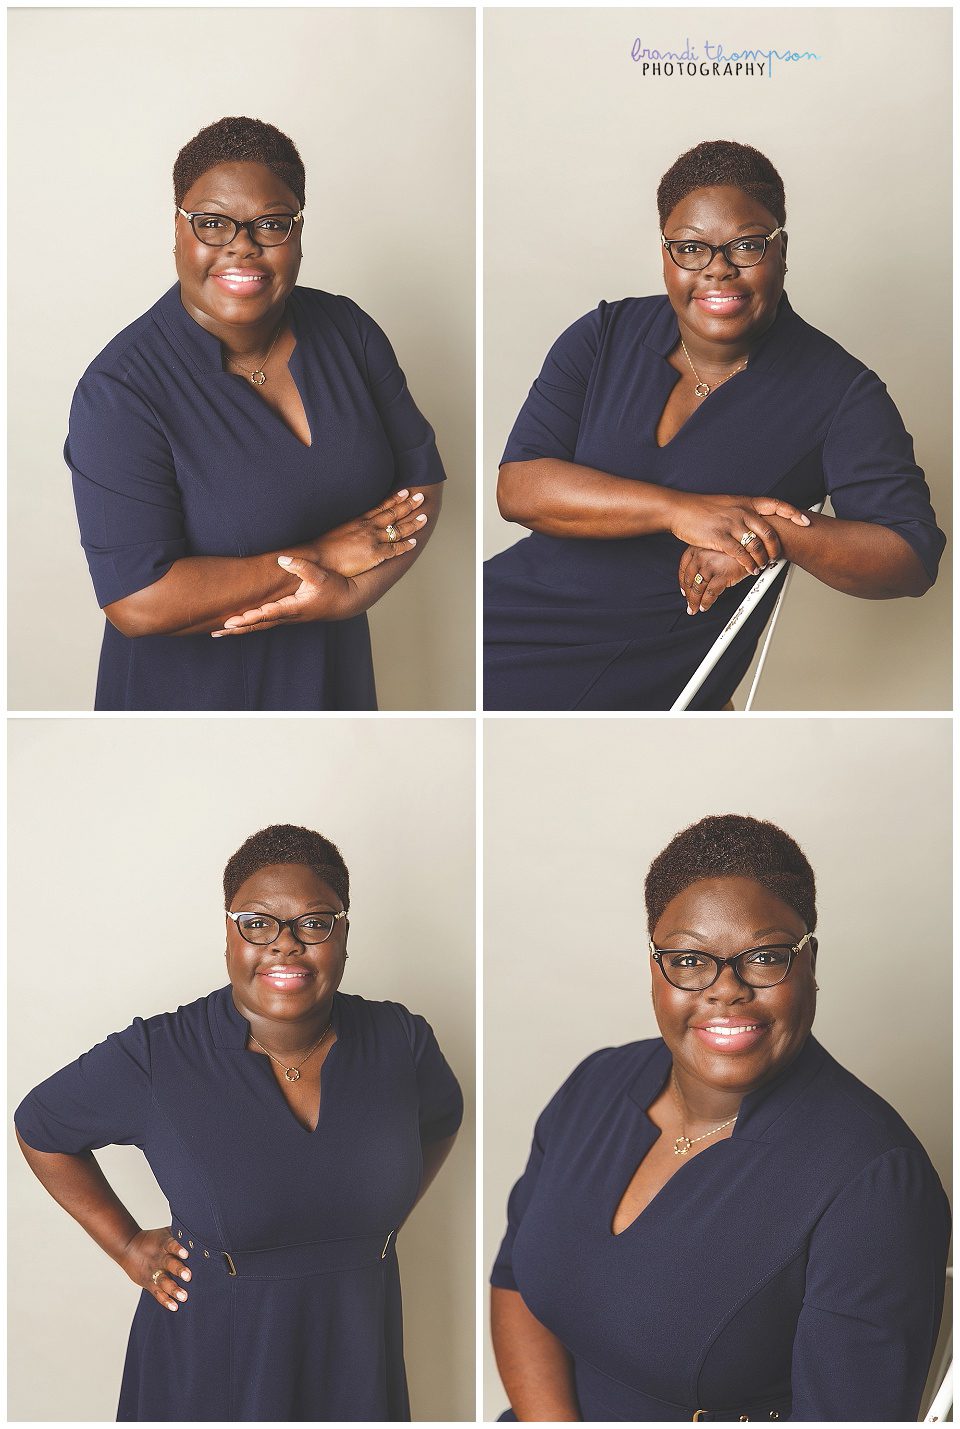 A collage of headshots of a Black woman with short hair in a navy dress against a light gray background